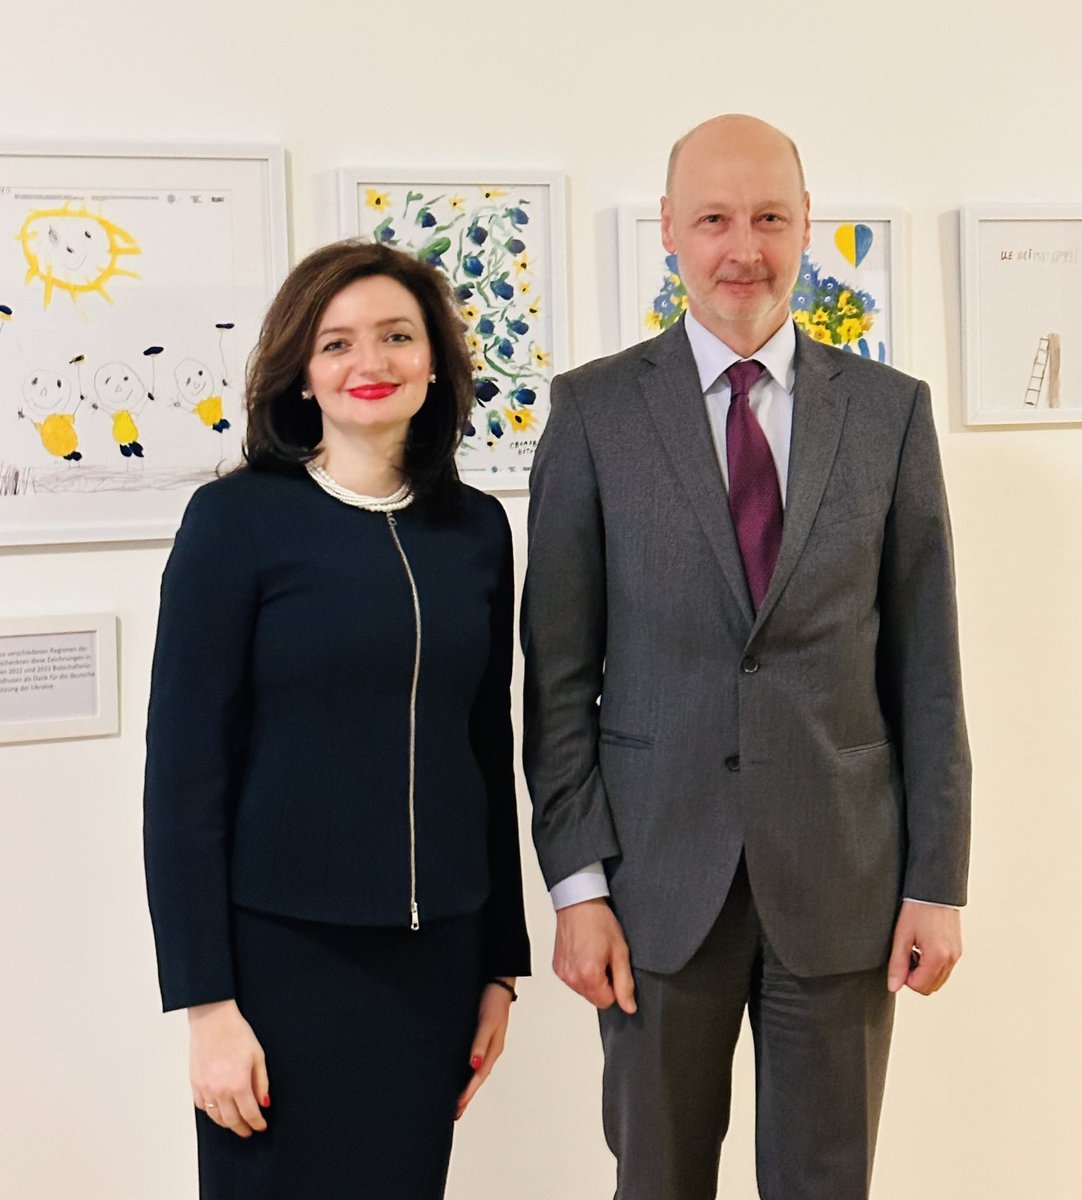 Great meeting with Thomas Lenk, Head of Ukraine department of the German Foreign Office. We exchanged views on policies and strategies to support Ukrainians in Germany and strengthen their identity. Thank you, Germany, for your help #StandWithUkraine